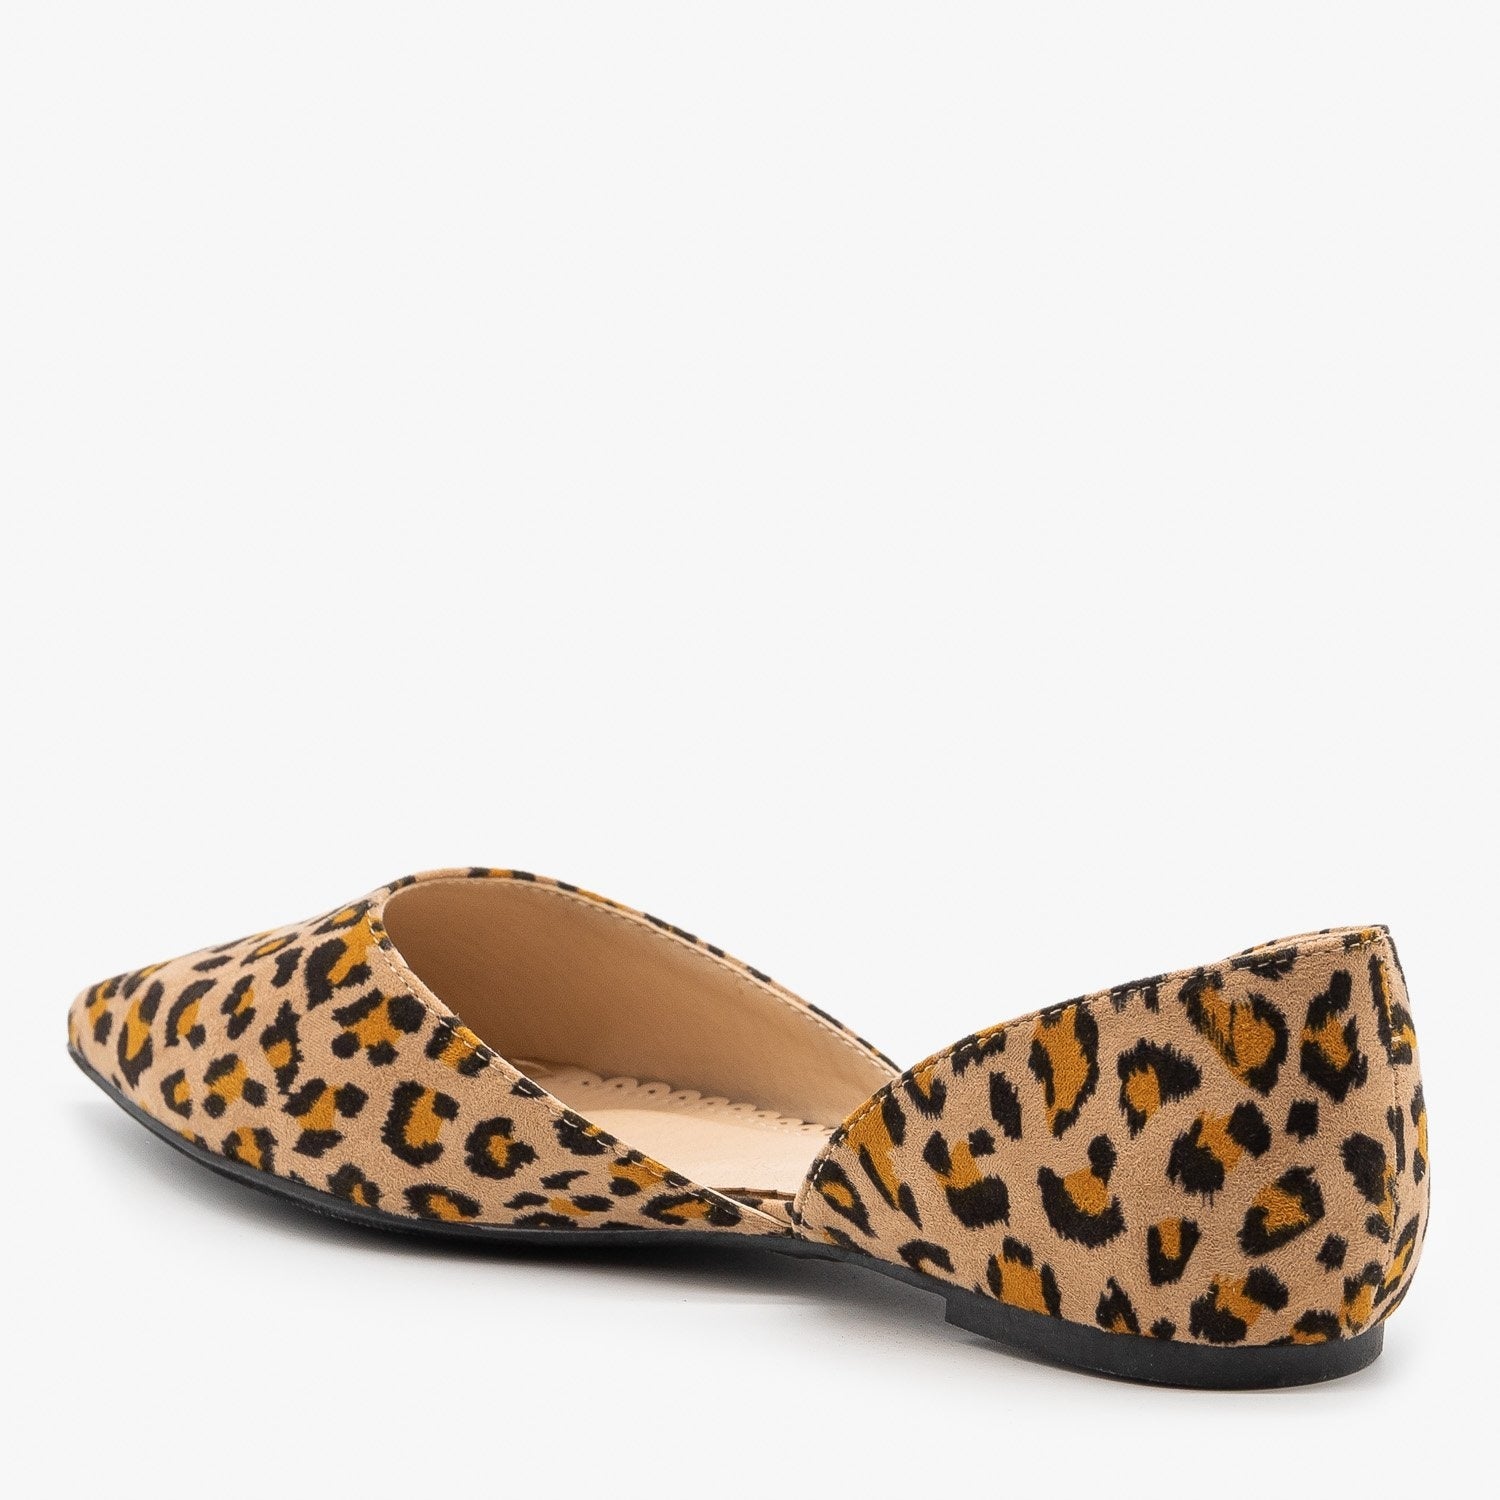 Leopard Print d'Orsay Pointed Toe Flats 